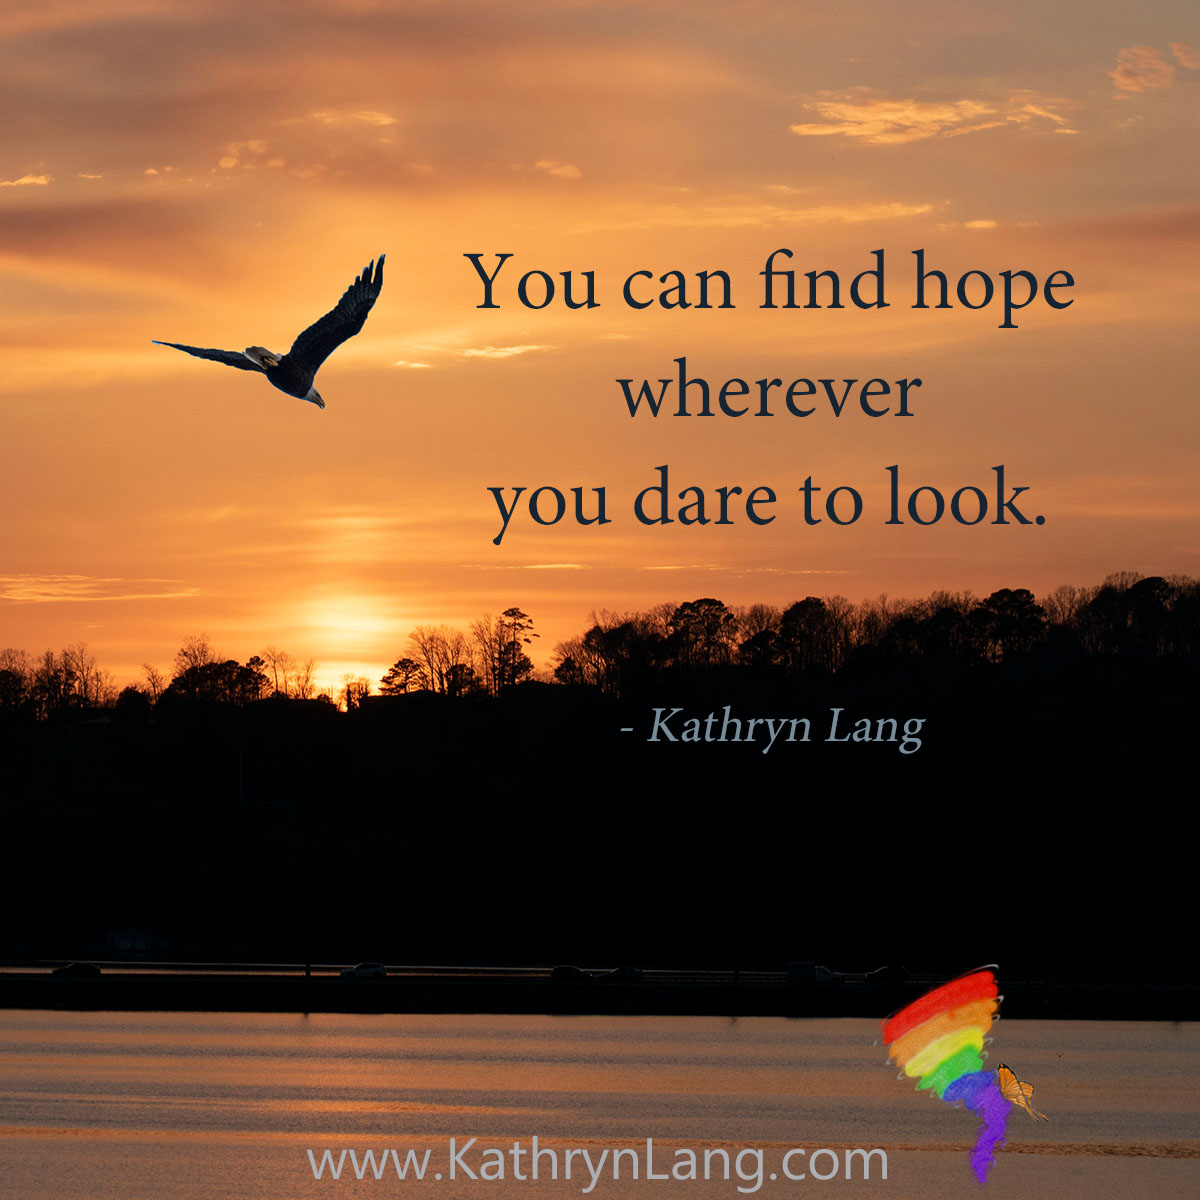 #QuotefortheDay

You can find hope wherever you dare to look.